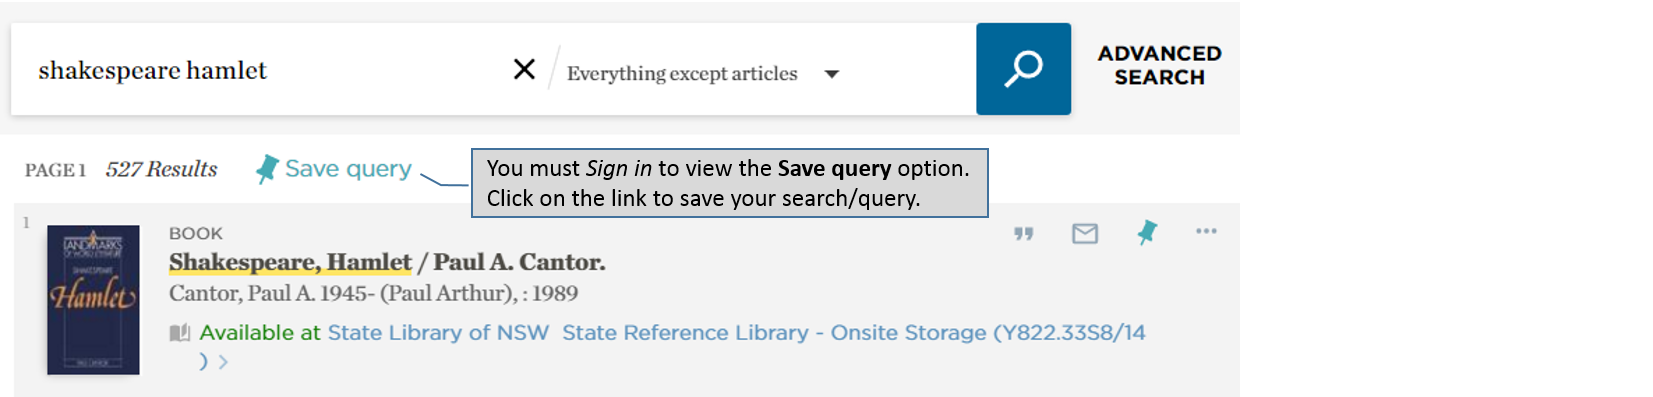 Catalogue – saving and viewing queries